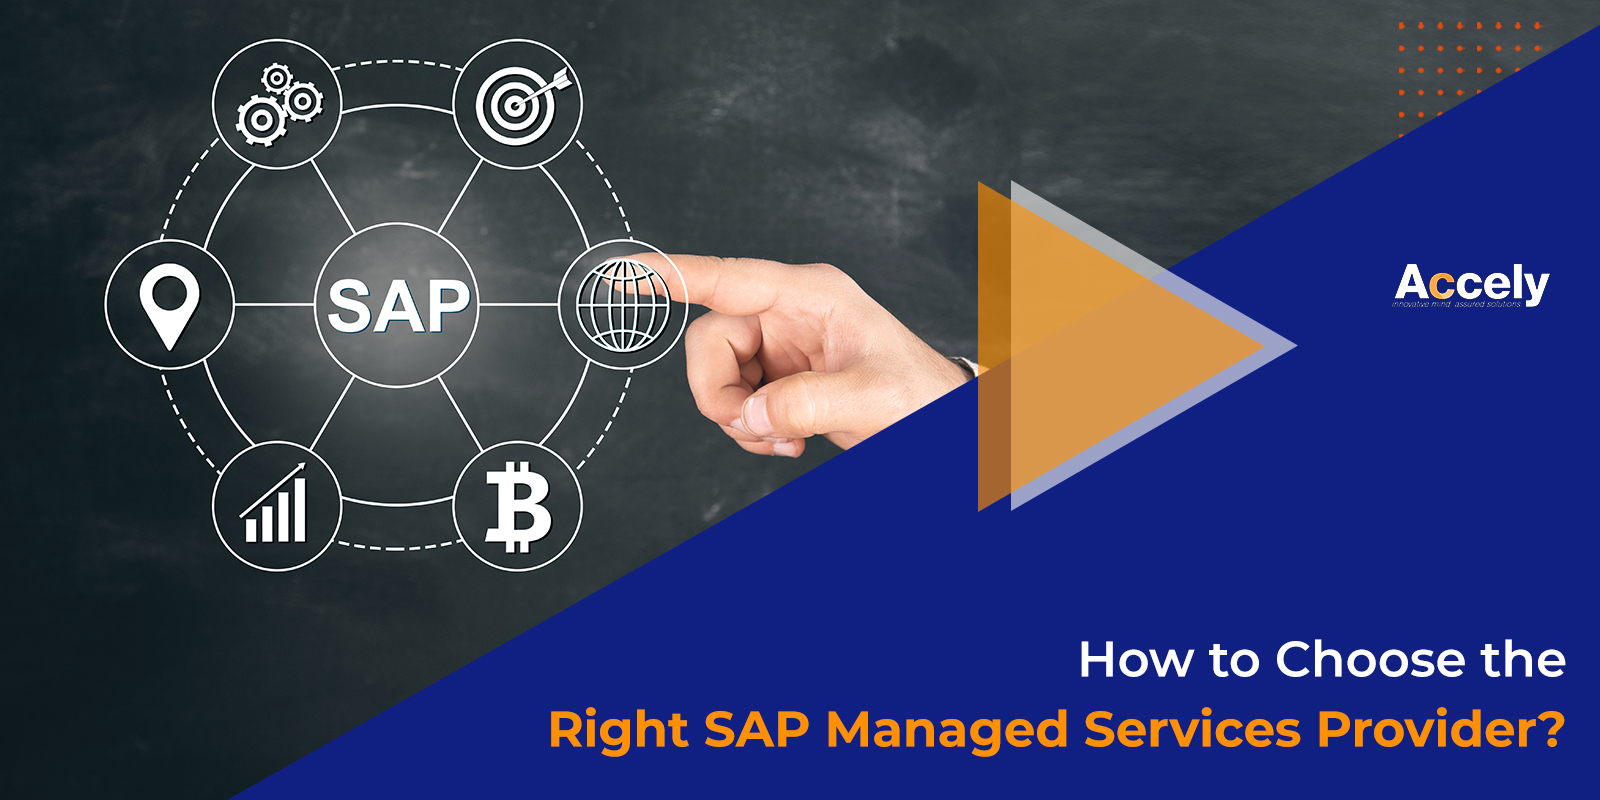 How to Choose the Right SAP Managed Services Provider?